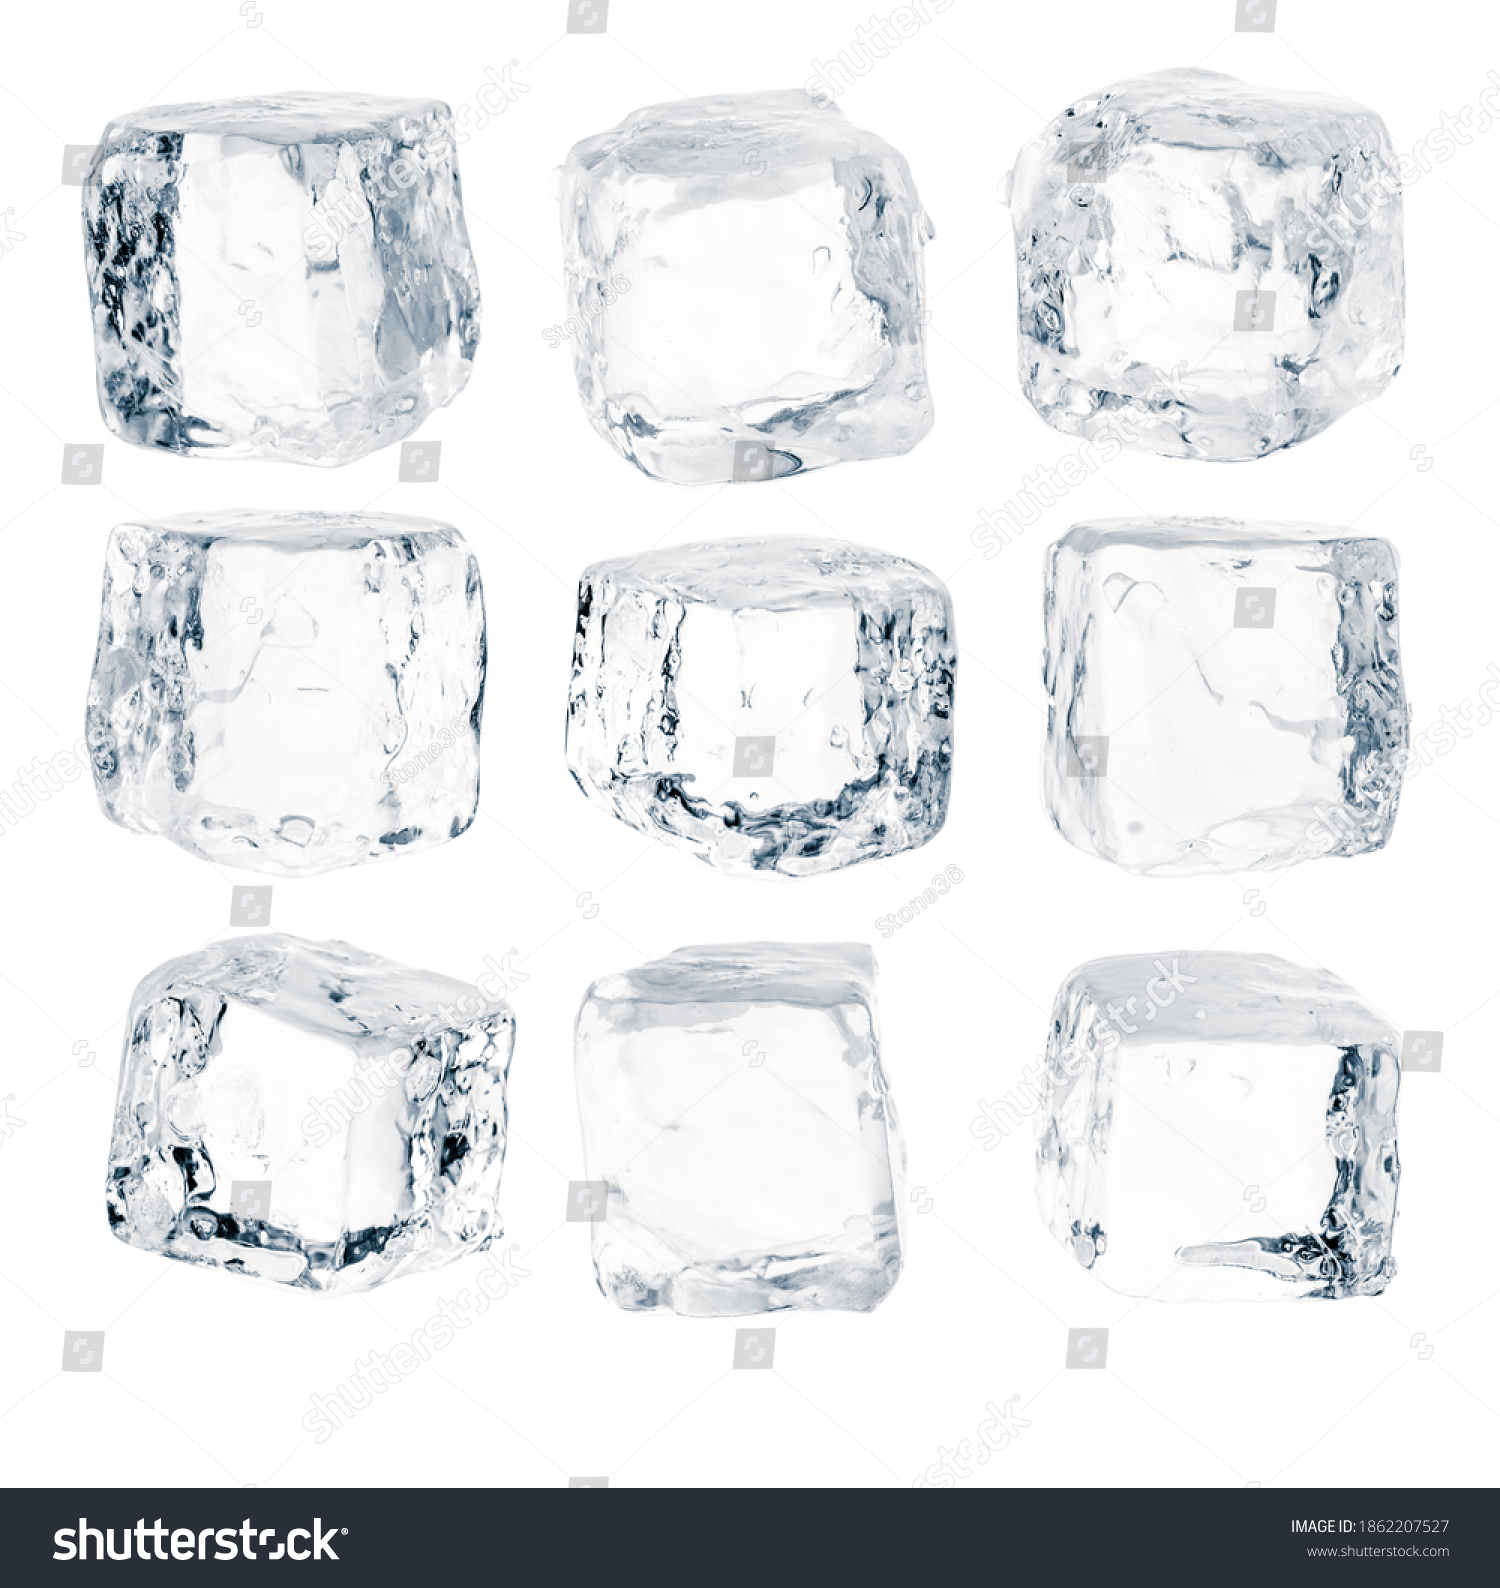 Set of pieces of pure blue natural crushed ice. Ice cubes. Clipping path for each cube included. #1862207527